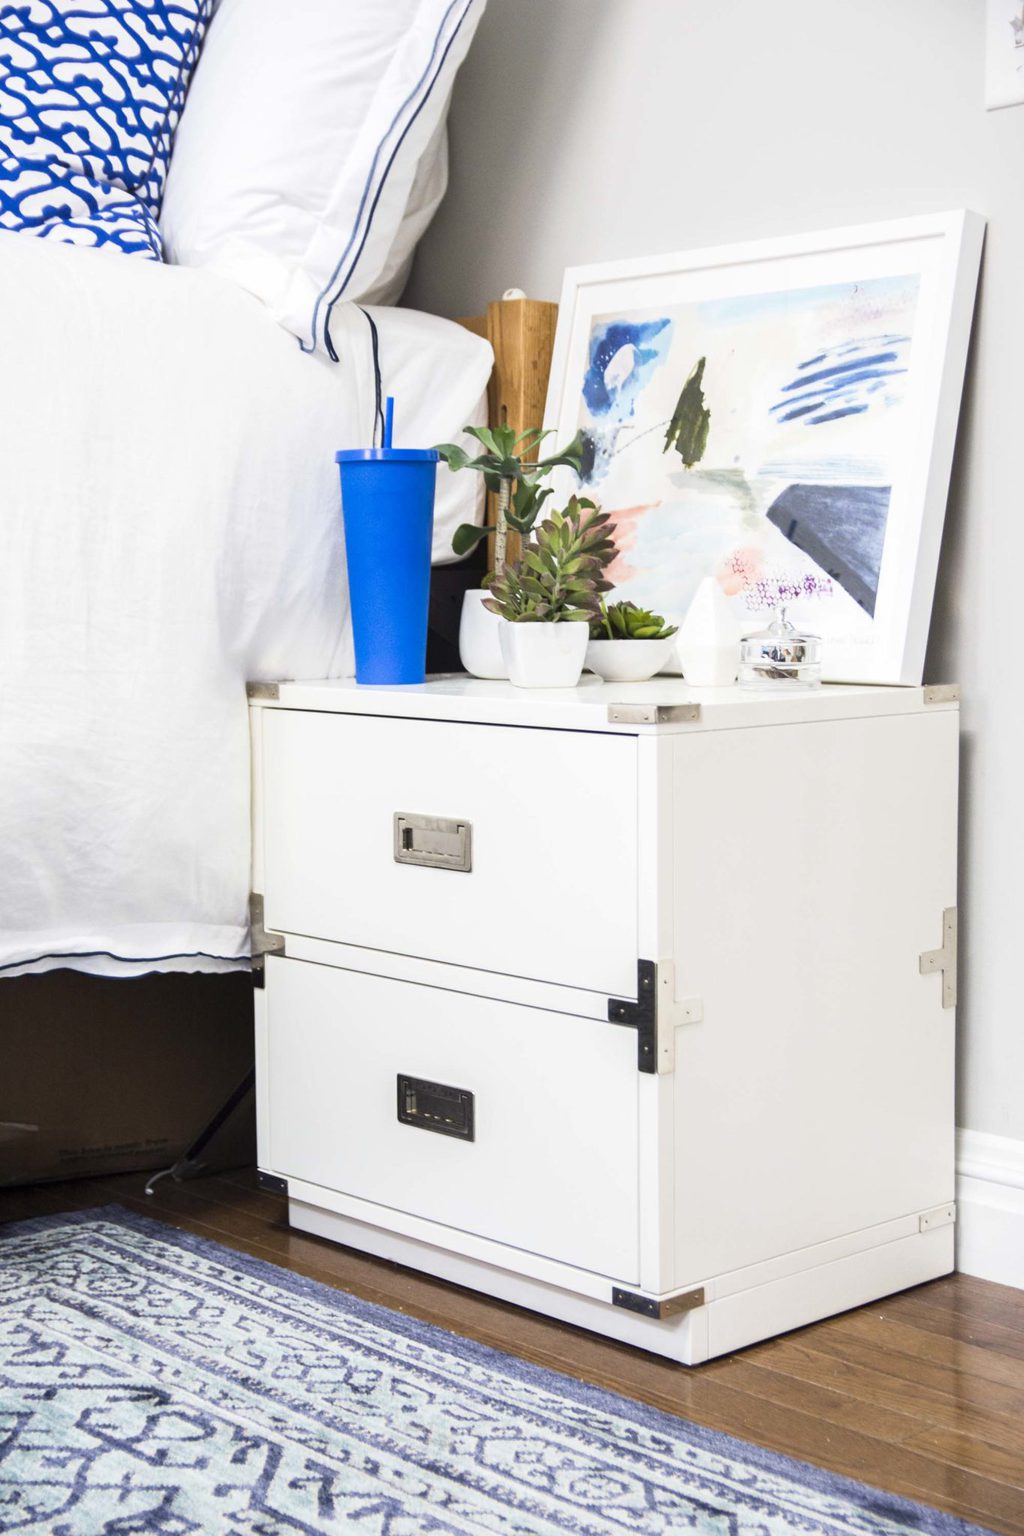 Blue and white bedroom dorm room design on Thou Swell @thouswellblog